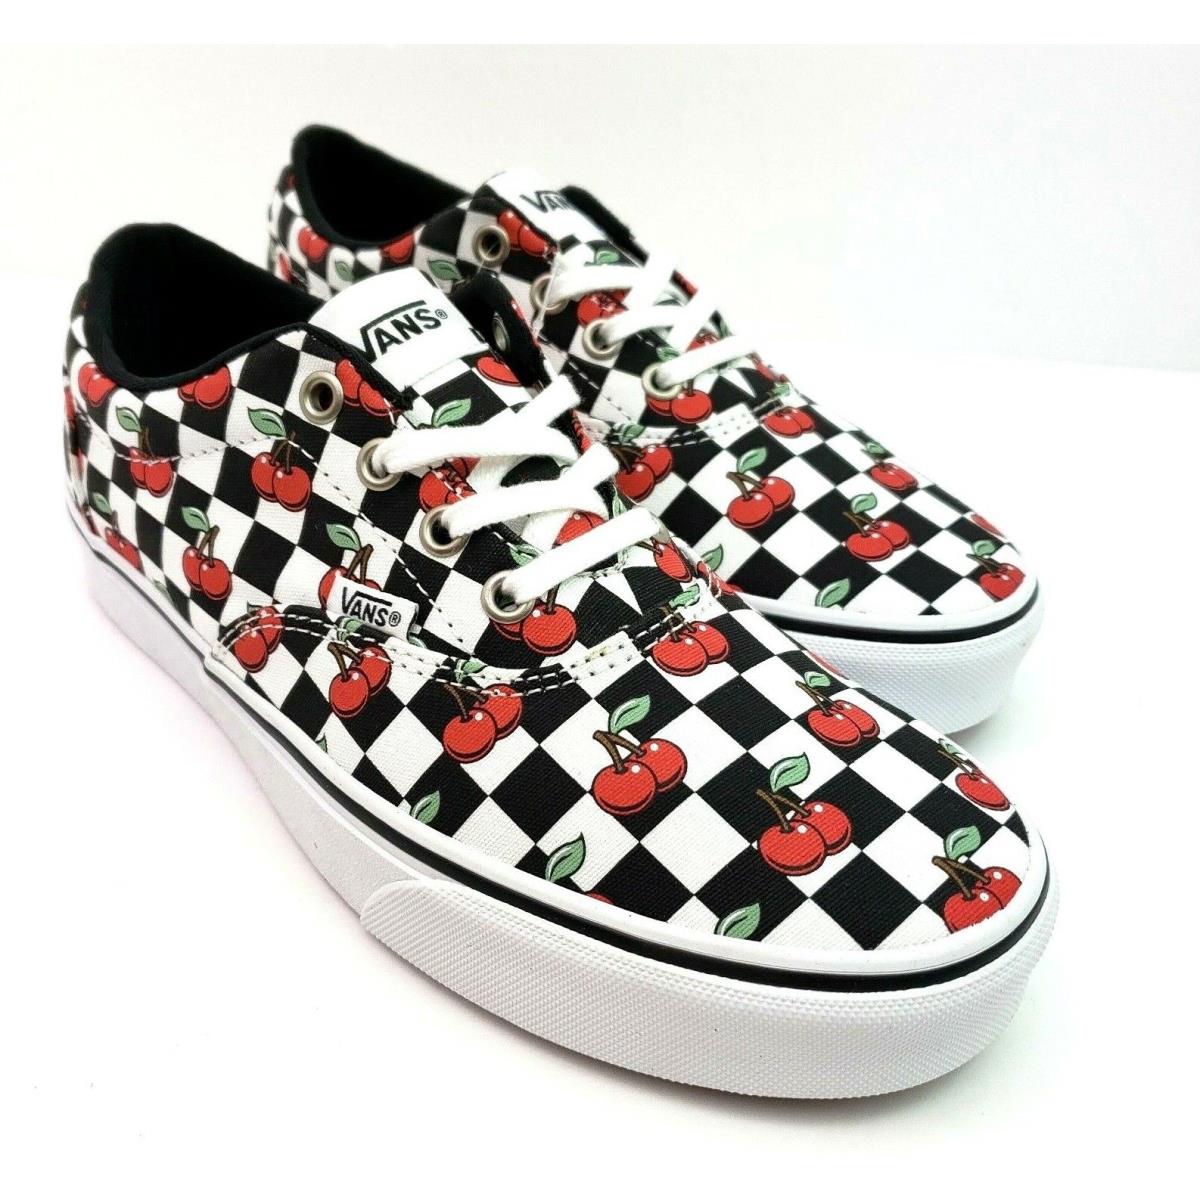 Vans Doheny Old Skool Womens Size 8 Cherry Checkered Low Skate Sneaker Shoes